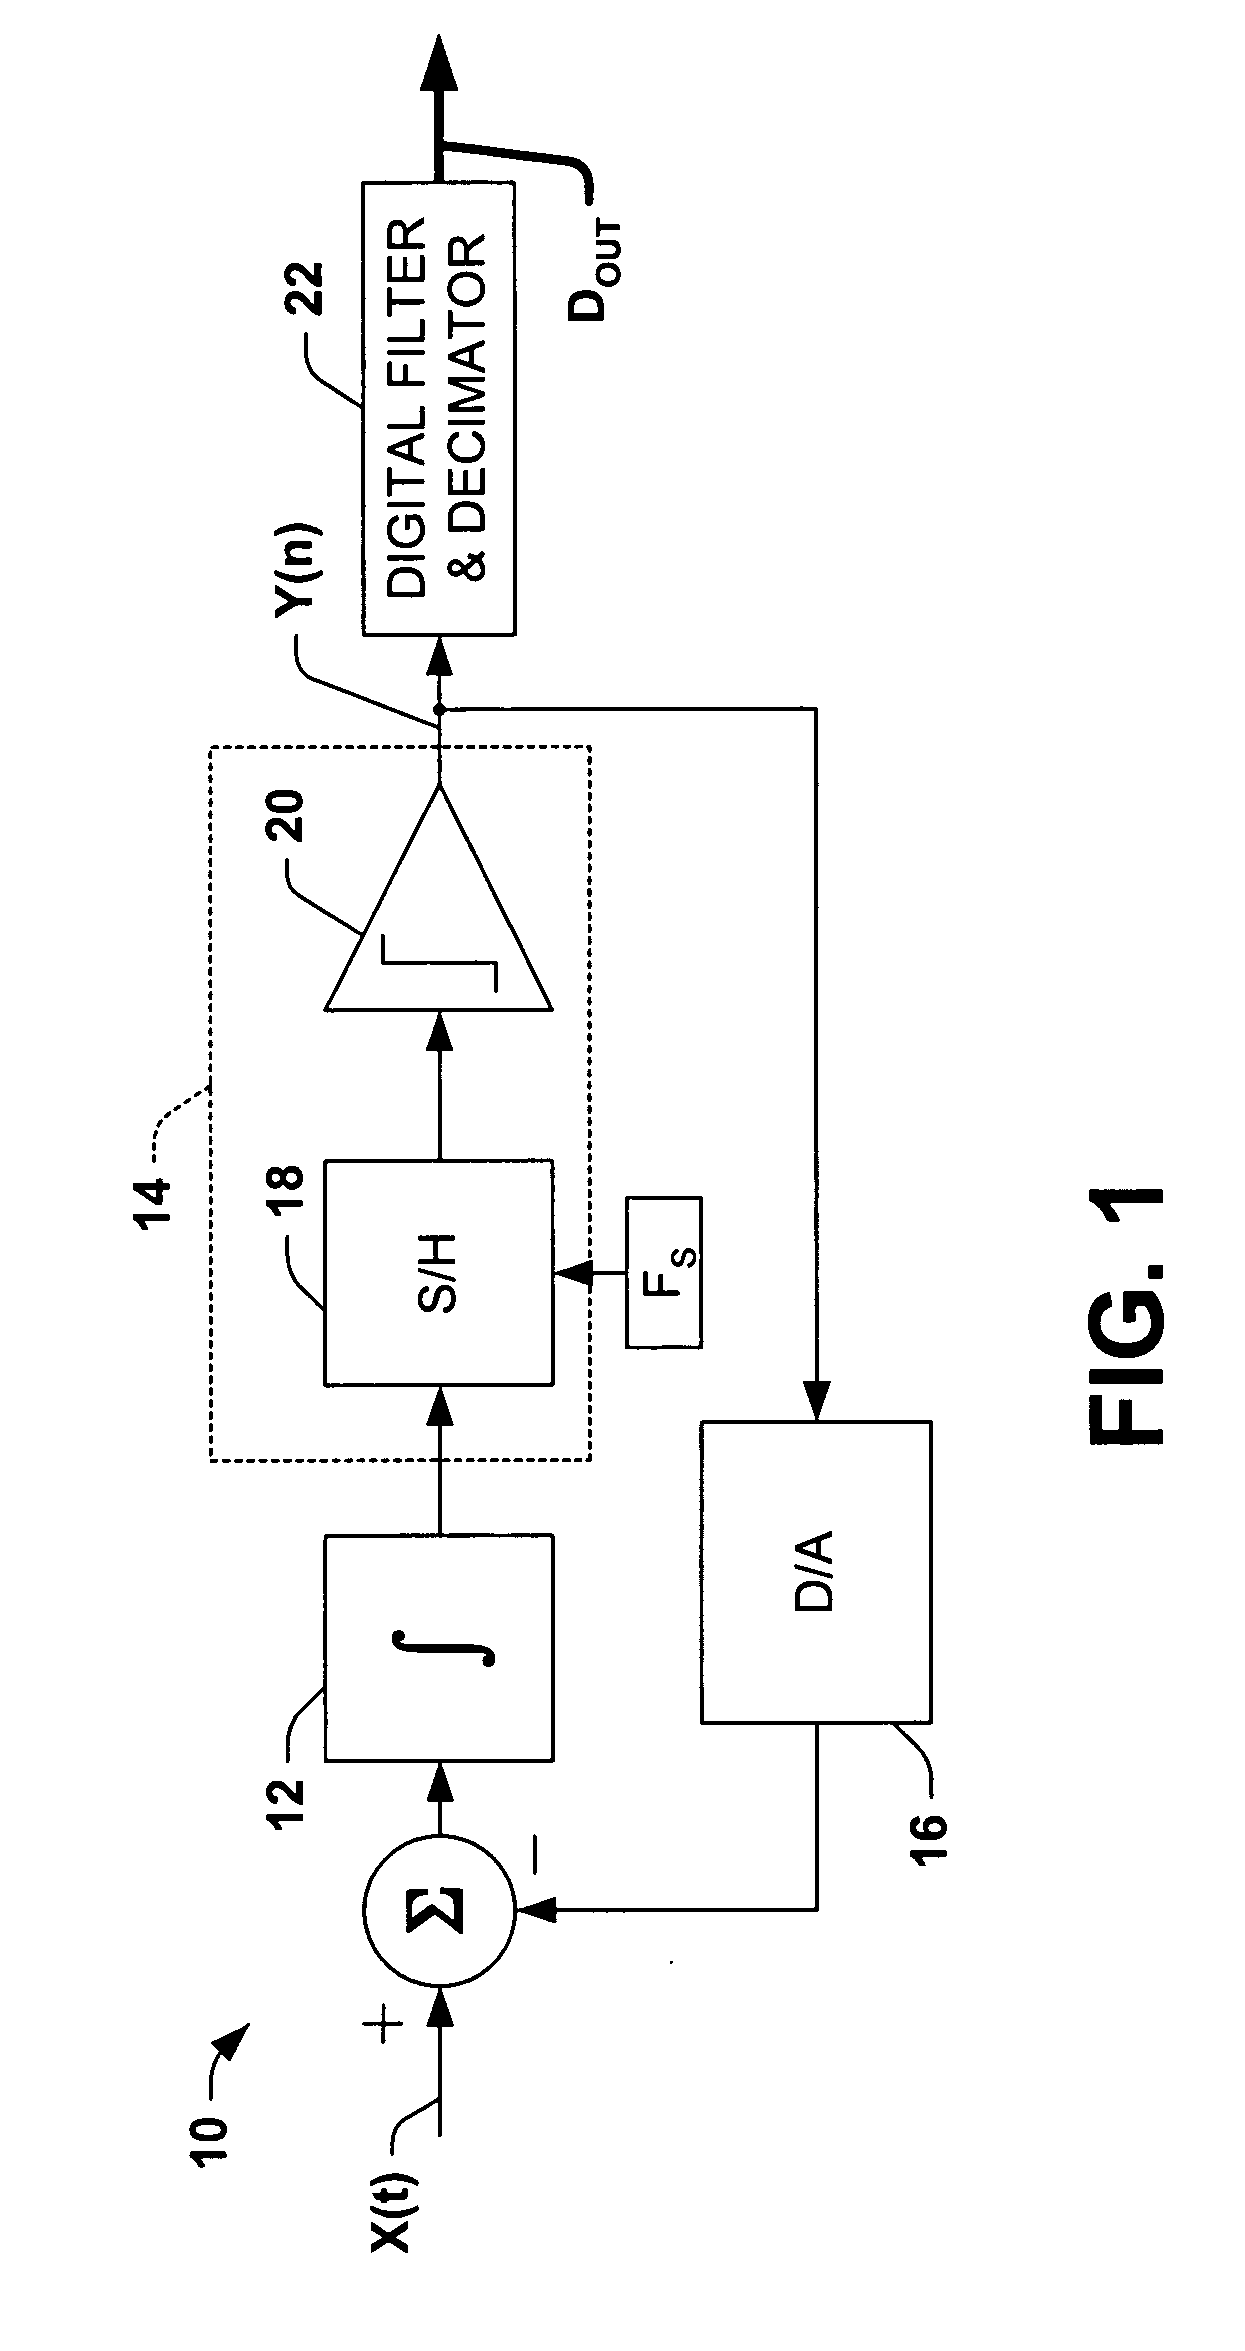 Continuous time fourth order delta sigma analog-to-digital converter